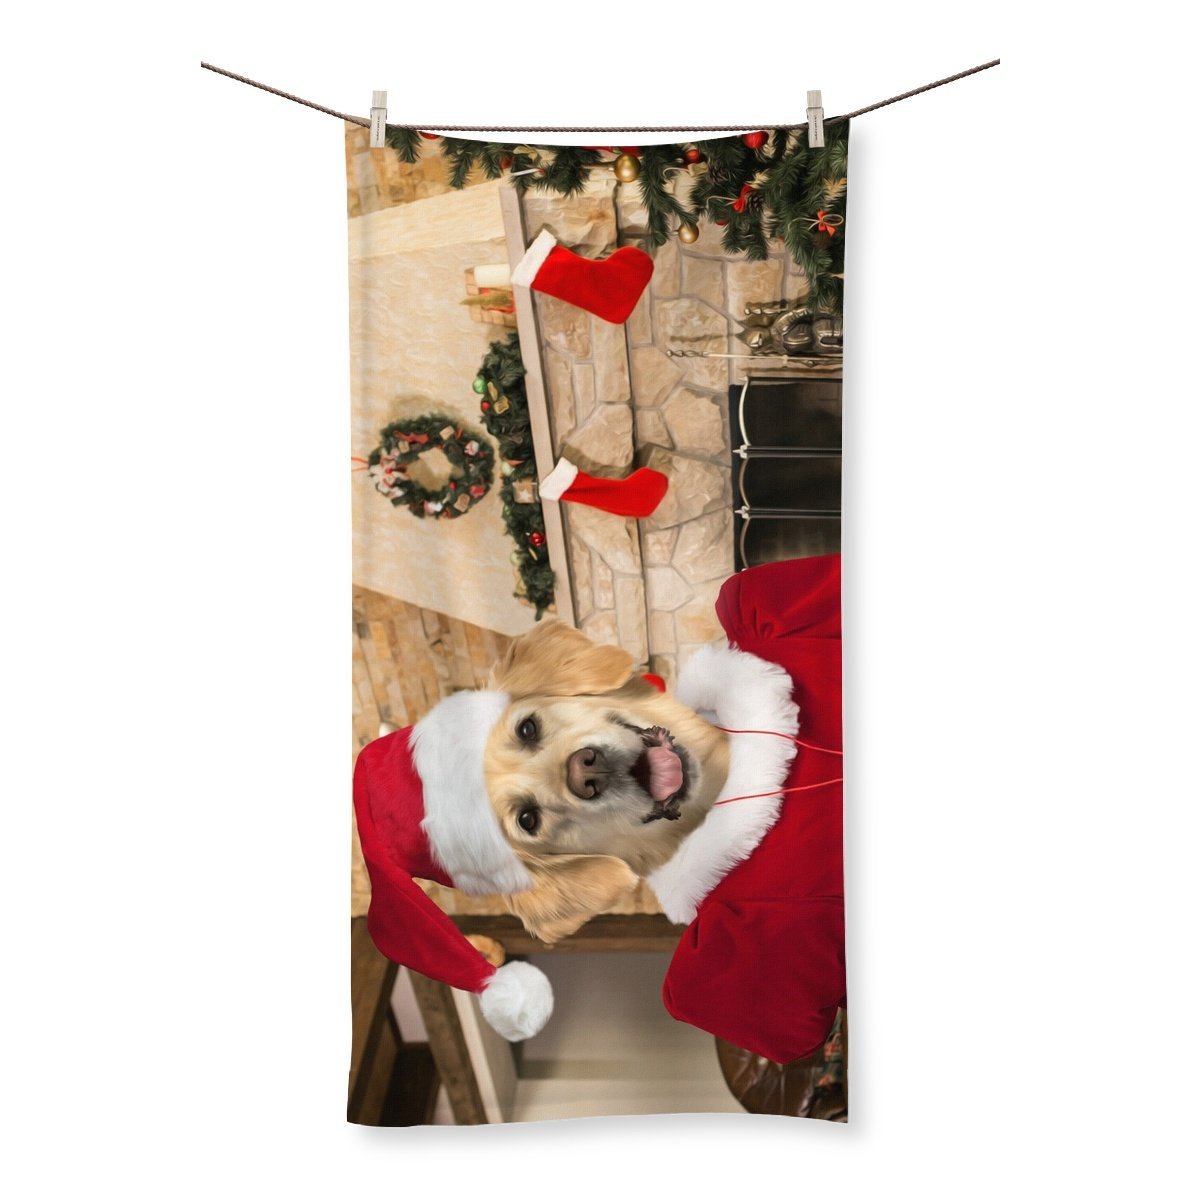 Mrs Claus: Custom Pet Towel - Paw & Glory - #pet portraits# - #dog portraits# - #pet portraits uk#Paw & Glory, pawandglory, personalized pet and owner canvas, custom pet painting, best dog artists, dog portrait background colors, dog portrait painting, painting of your dog, pet portrait,custom pet portrait Towel